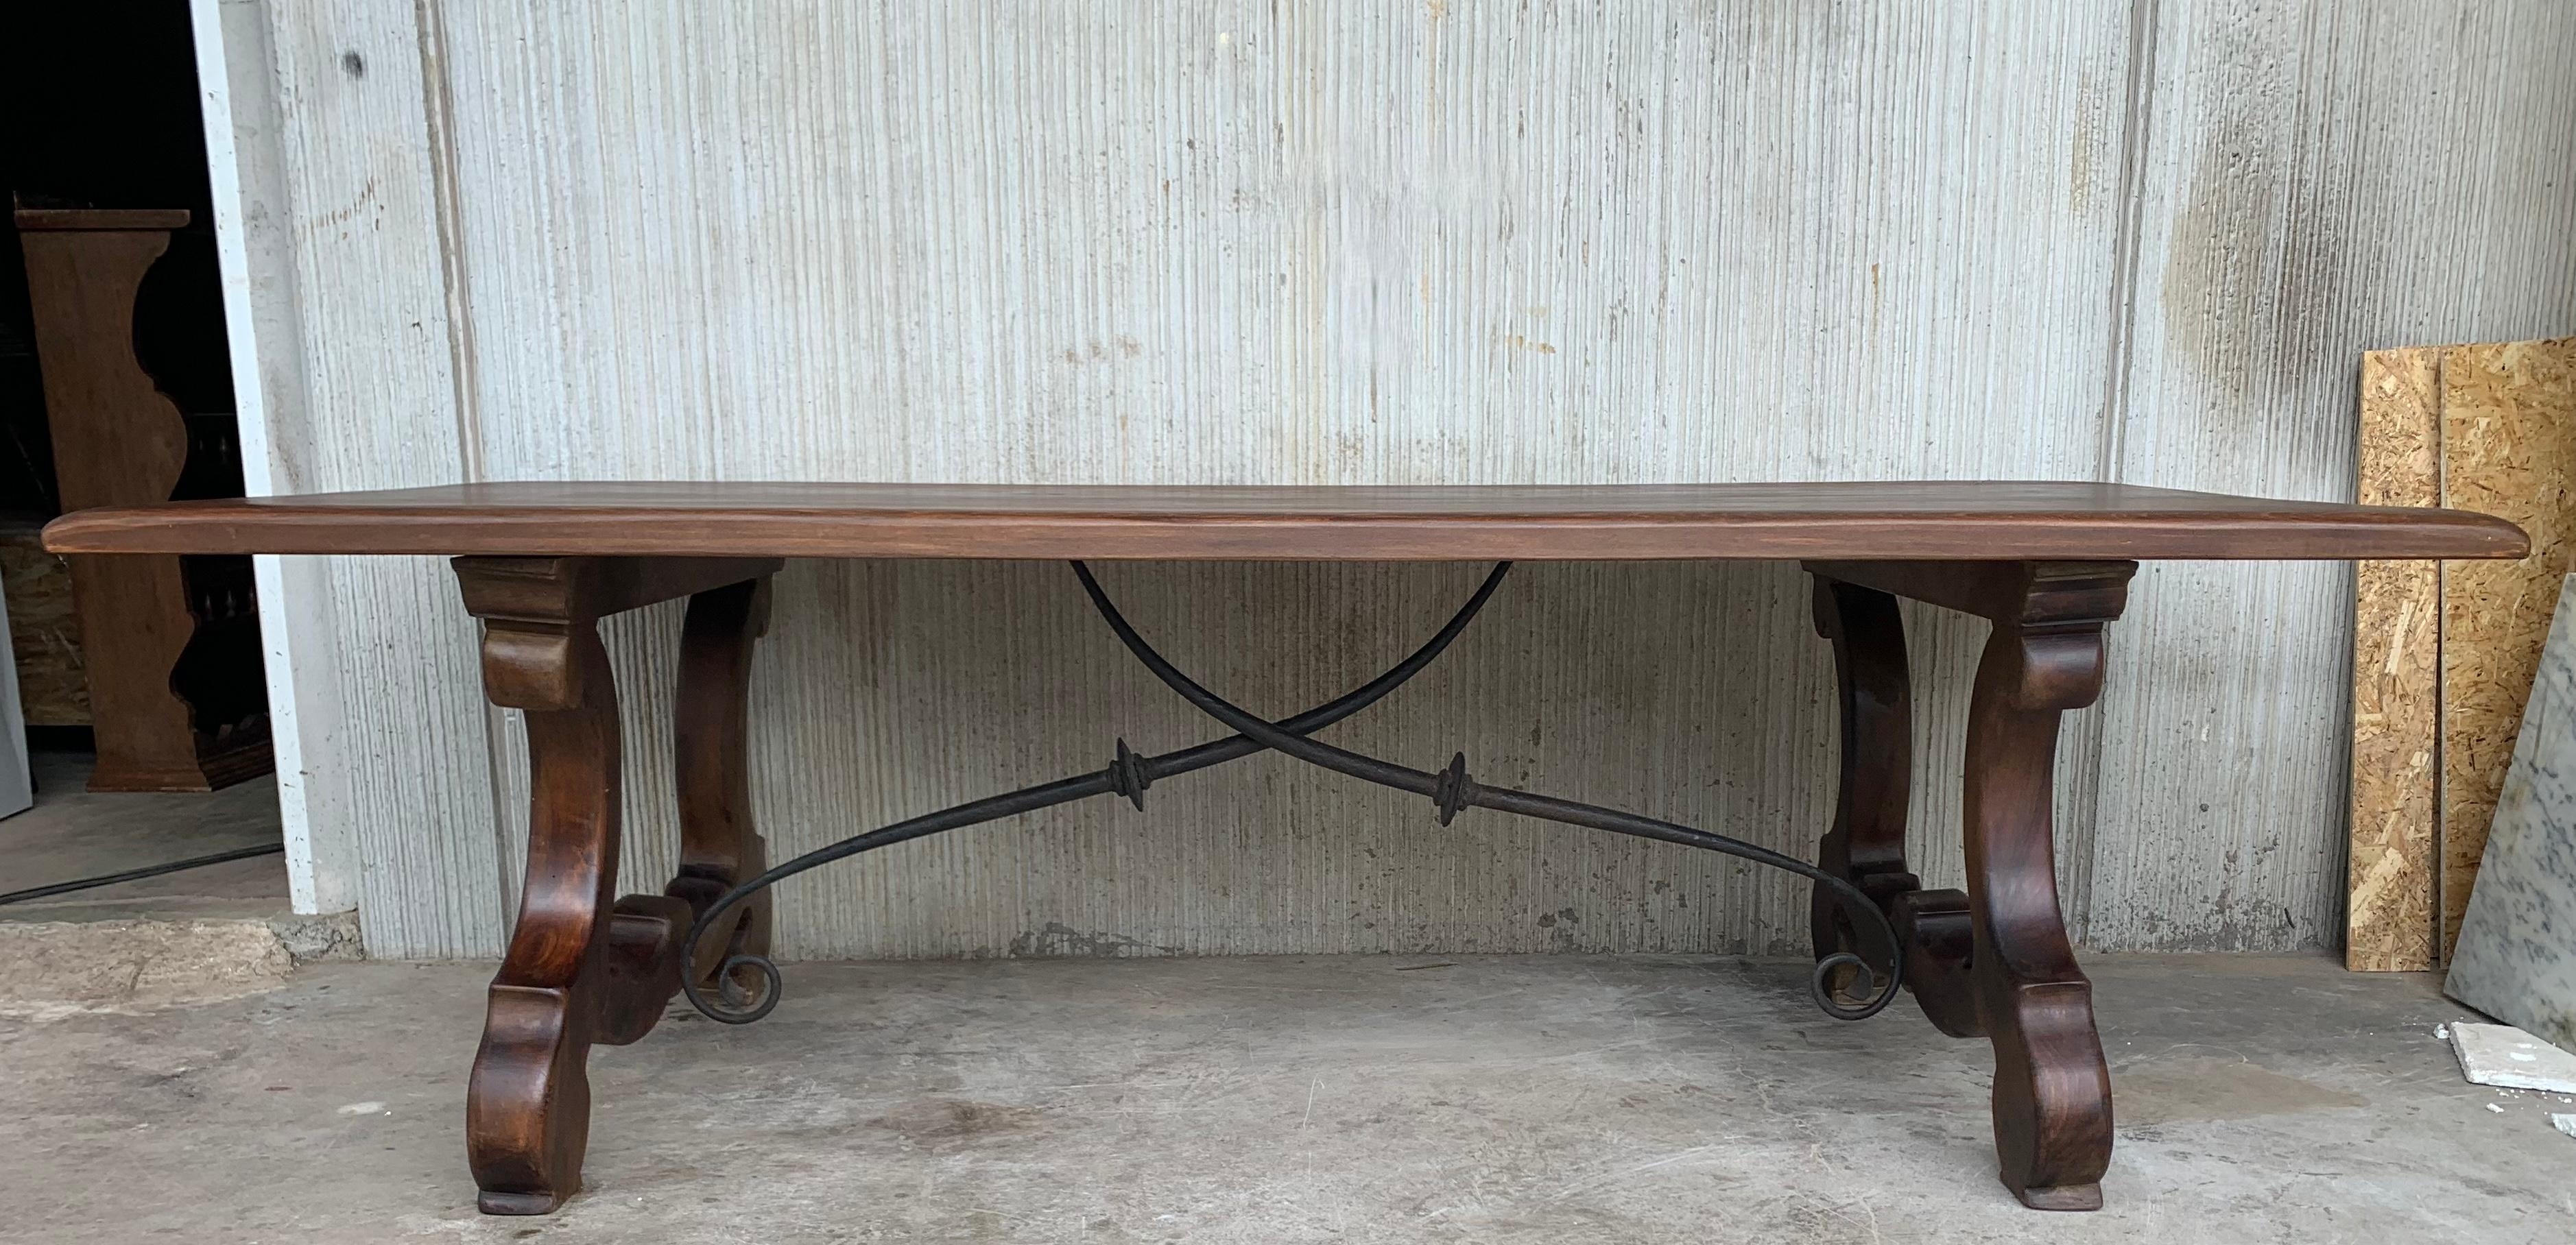 A monumental 20th century Spanish trestle table, having a rectangular framed solid walnut inset board top, resting on hand carved, classical lyre legs joined by four beautifully iron stretchers.

This table was designed for a grand room and seats